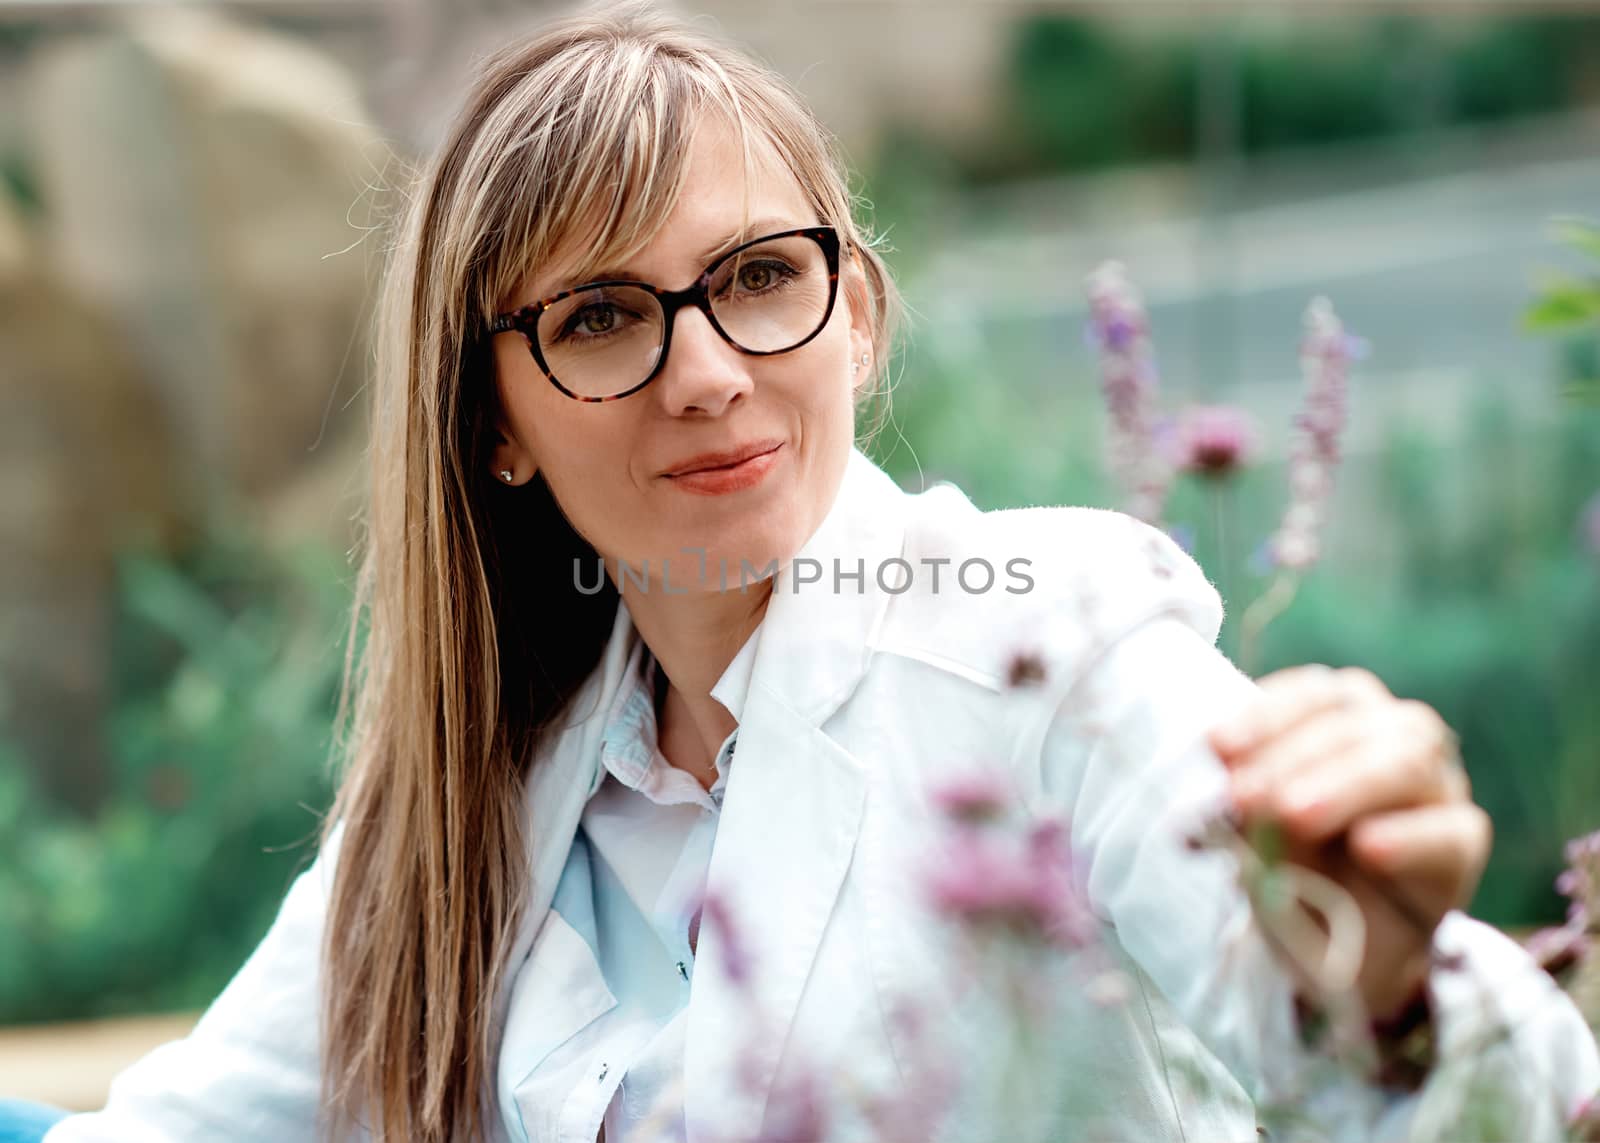 portrait of a woman in glasses and white coat looking at flowers by Iryna_Melnyk